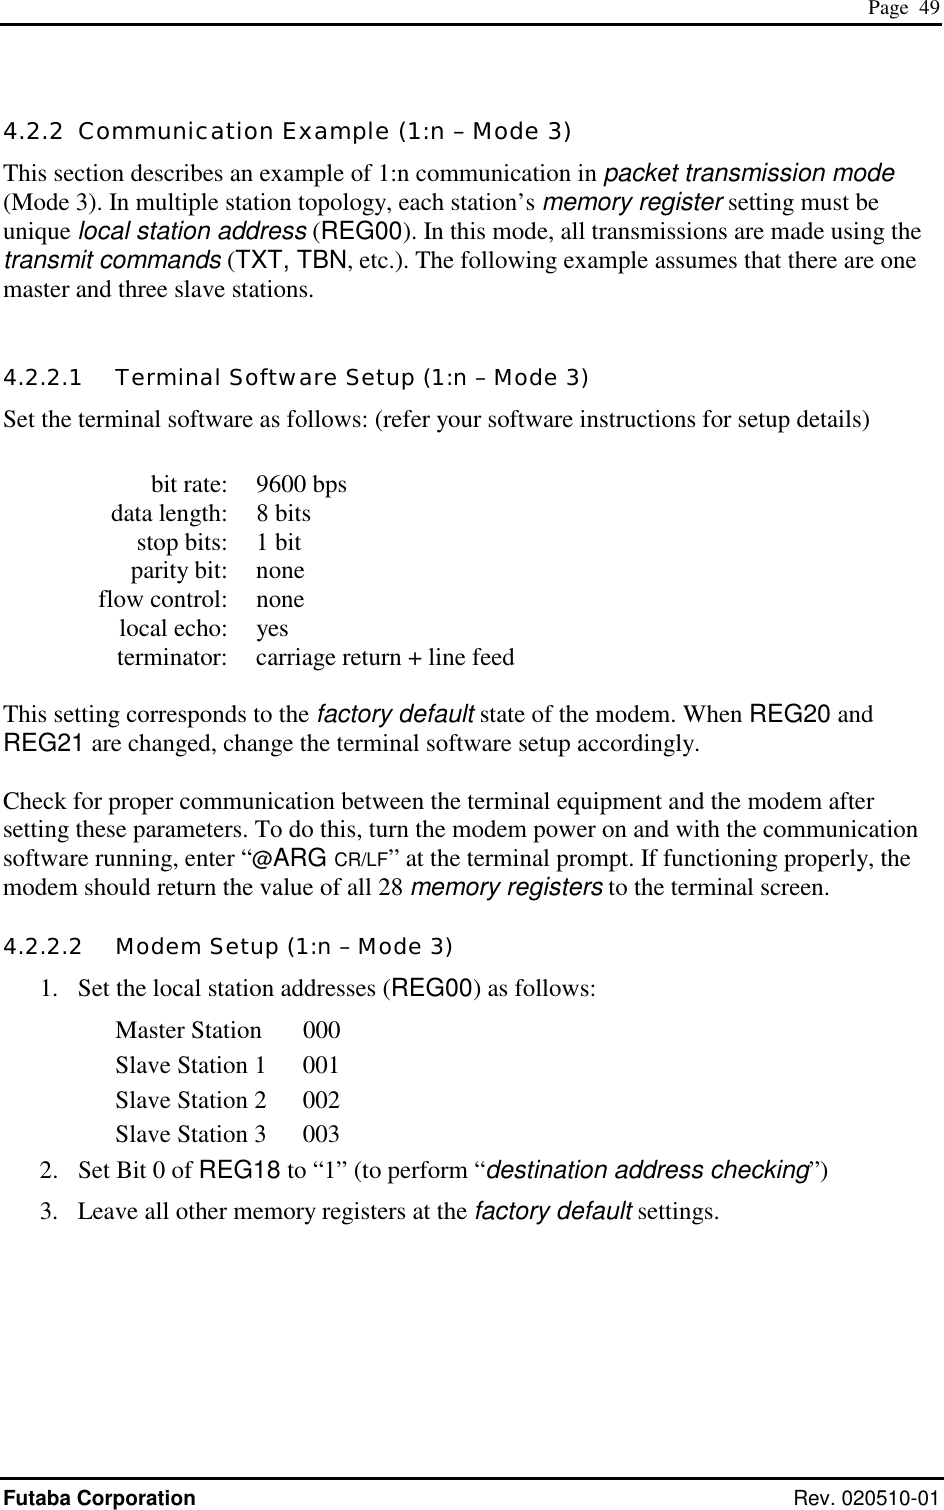  Page  49 Futaba Corporation Rev. 020510-01 4.2.2  Communication Example (1:n – Mode 3) This section describes an example of 1:n communication in packet transmission mode (Mode 3). In multiple station topology, each station’s memory register setting must be unique local station address (REG00). In this mode, all transmissions are made using the transmit commands (TXT, TBN, etc.). The following example assumes that there are one master and three slave stations.  4.2.2.1   Terminal Software Setup (1:n – Mode 3) Set the terminal software as follows: (refer your software instructions for setup details)    bit rate:  9600 bps   data length:  8 bits   stop bits:  1 bit  parity bit: none  flow control: none  local echo: yes   terminator:  carriage return + line feed  This setting corresponds to the factory default state of the modem. When REG20 and REG21 are changed, change the terminal software setup accordingly.  Check for proper communication between the terminal equipment and the modem after setting these parameters. To do this, turn the modem power on and with the communication software running, enter “@ARG CR/LF” at the terminal prompt. If functioning properly, the modem should return the value of all 28 memory registers to the terminal screen. 4.2.2.2   Modem Setup (1:n – Mode 3) 1.  Set the local station addresses (REG00) as follows: Master Station  000 Slave Station 1  001 Slave Station 2  002 Slave Station 3  003 2.  Set Bit 0 of REG18 to “1” (to perform “destination address checking”) 3.  Leave all other memory registers at the factory default settings. 